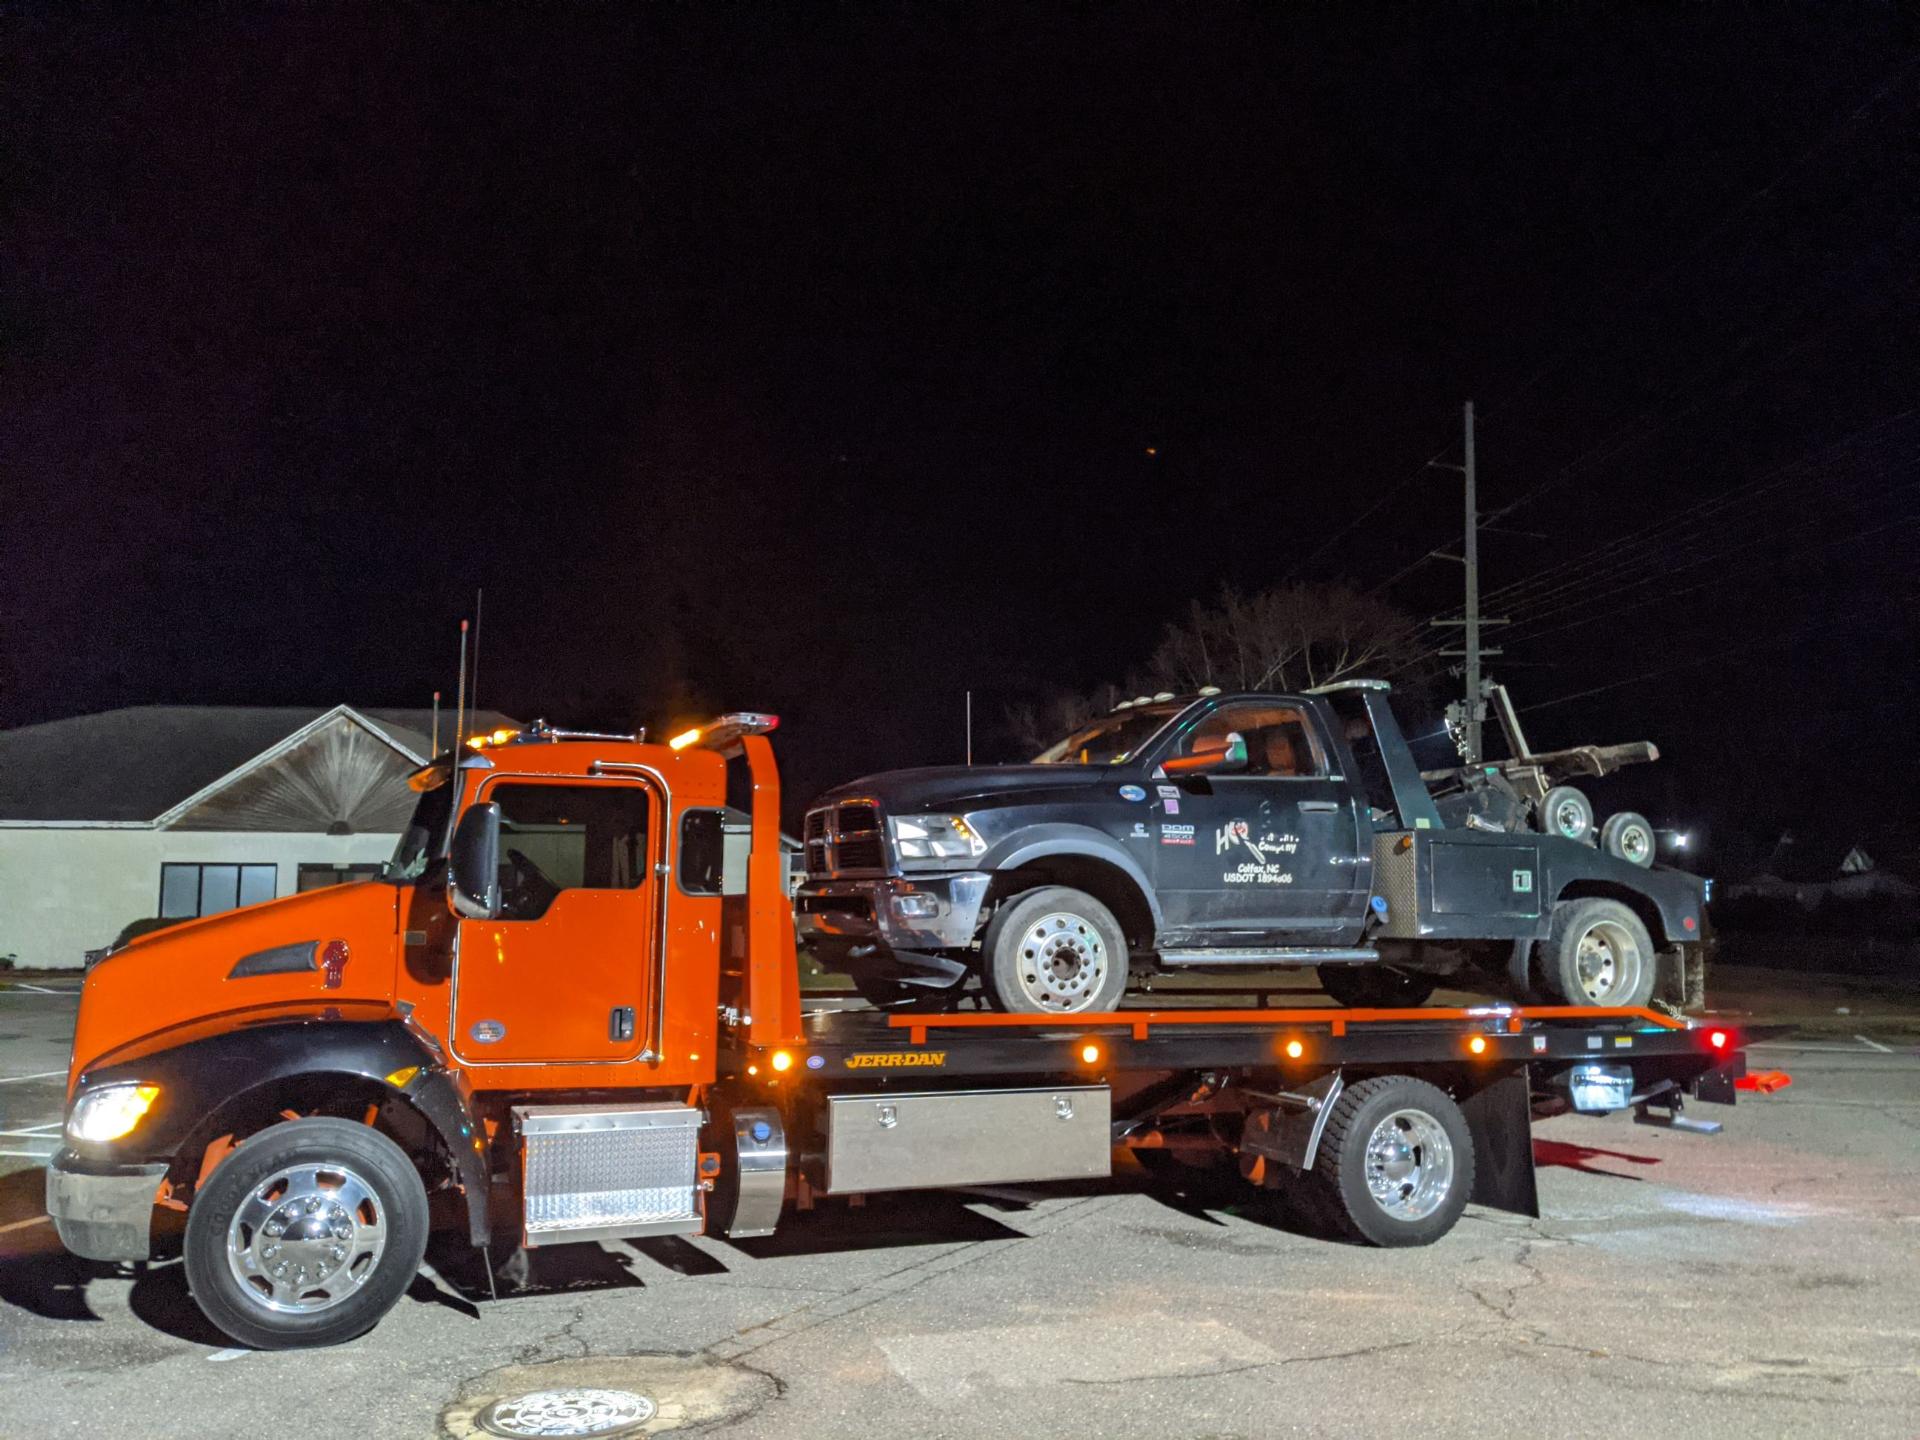 ALL NIGHT TOWING 7604 Raeford Rd, Fayetteville, NC 28304 - YP.com